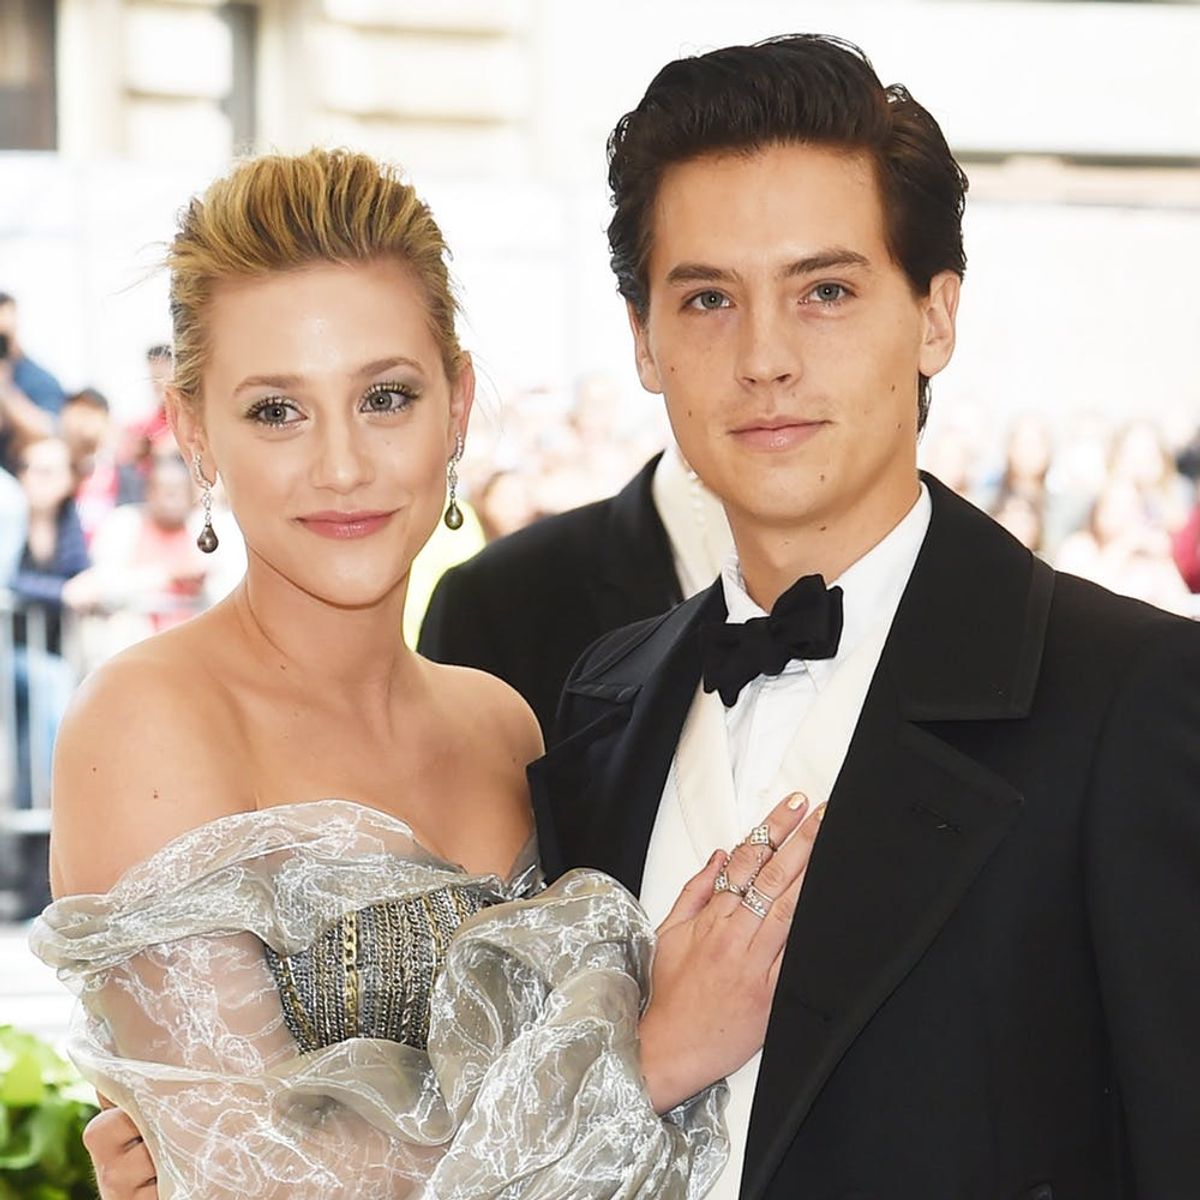 Lili Reinhart and Cole Sprouse Make Their Red Carpet Debut at the 2018 Met Gala